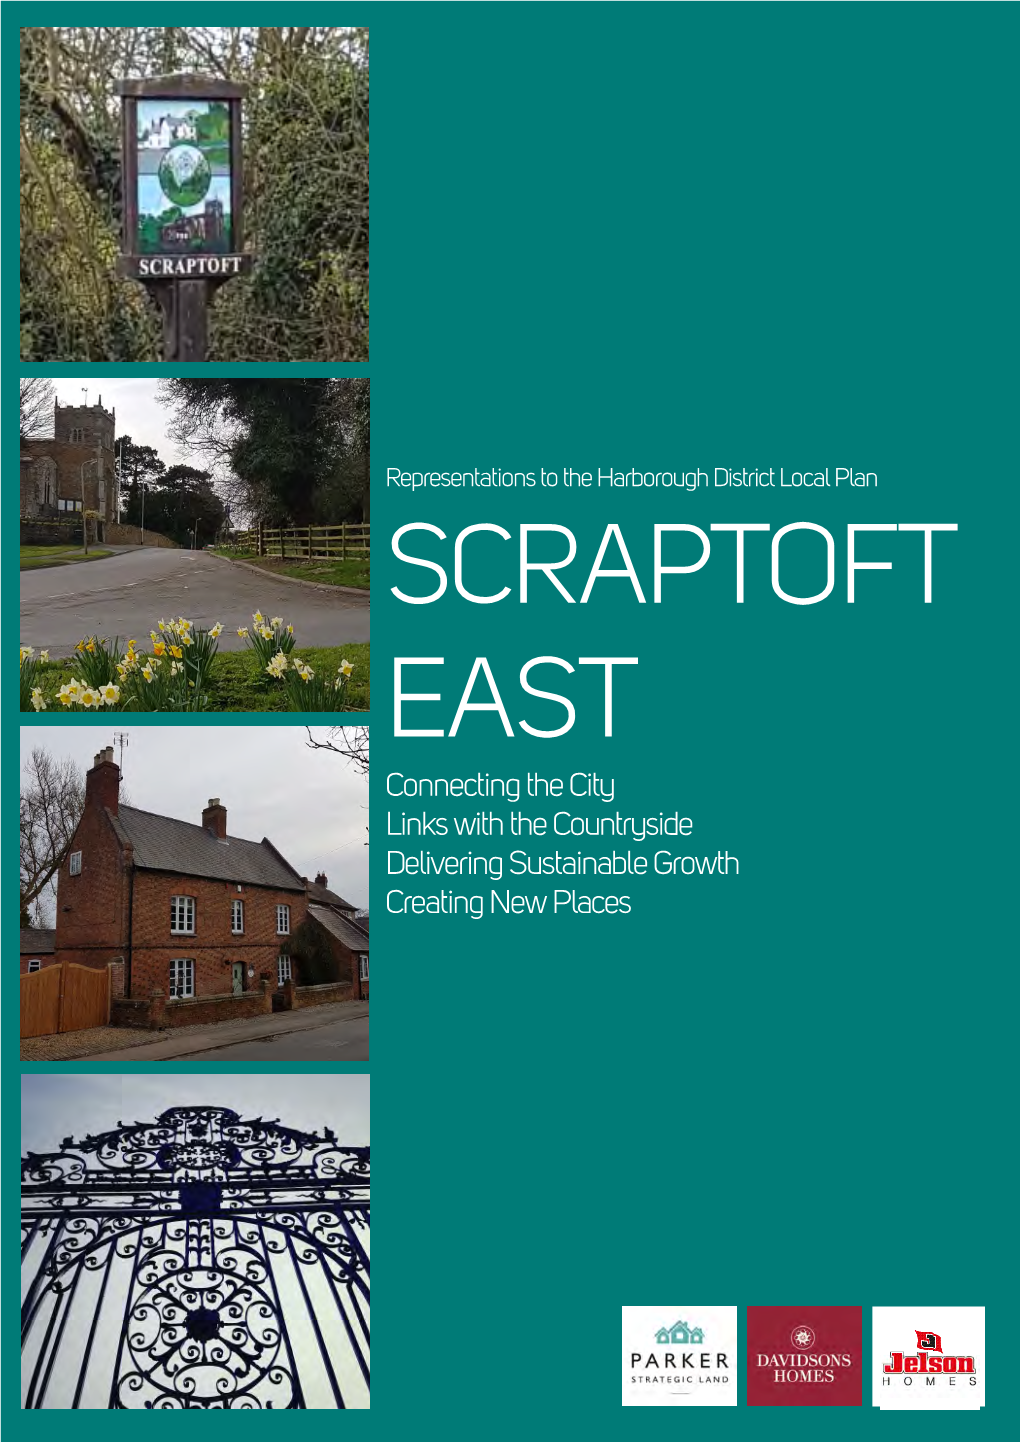 SCRAPTOFT EAST Connecting the City Links with the Countryside Delivering Sustainable Growth Creating New Places